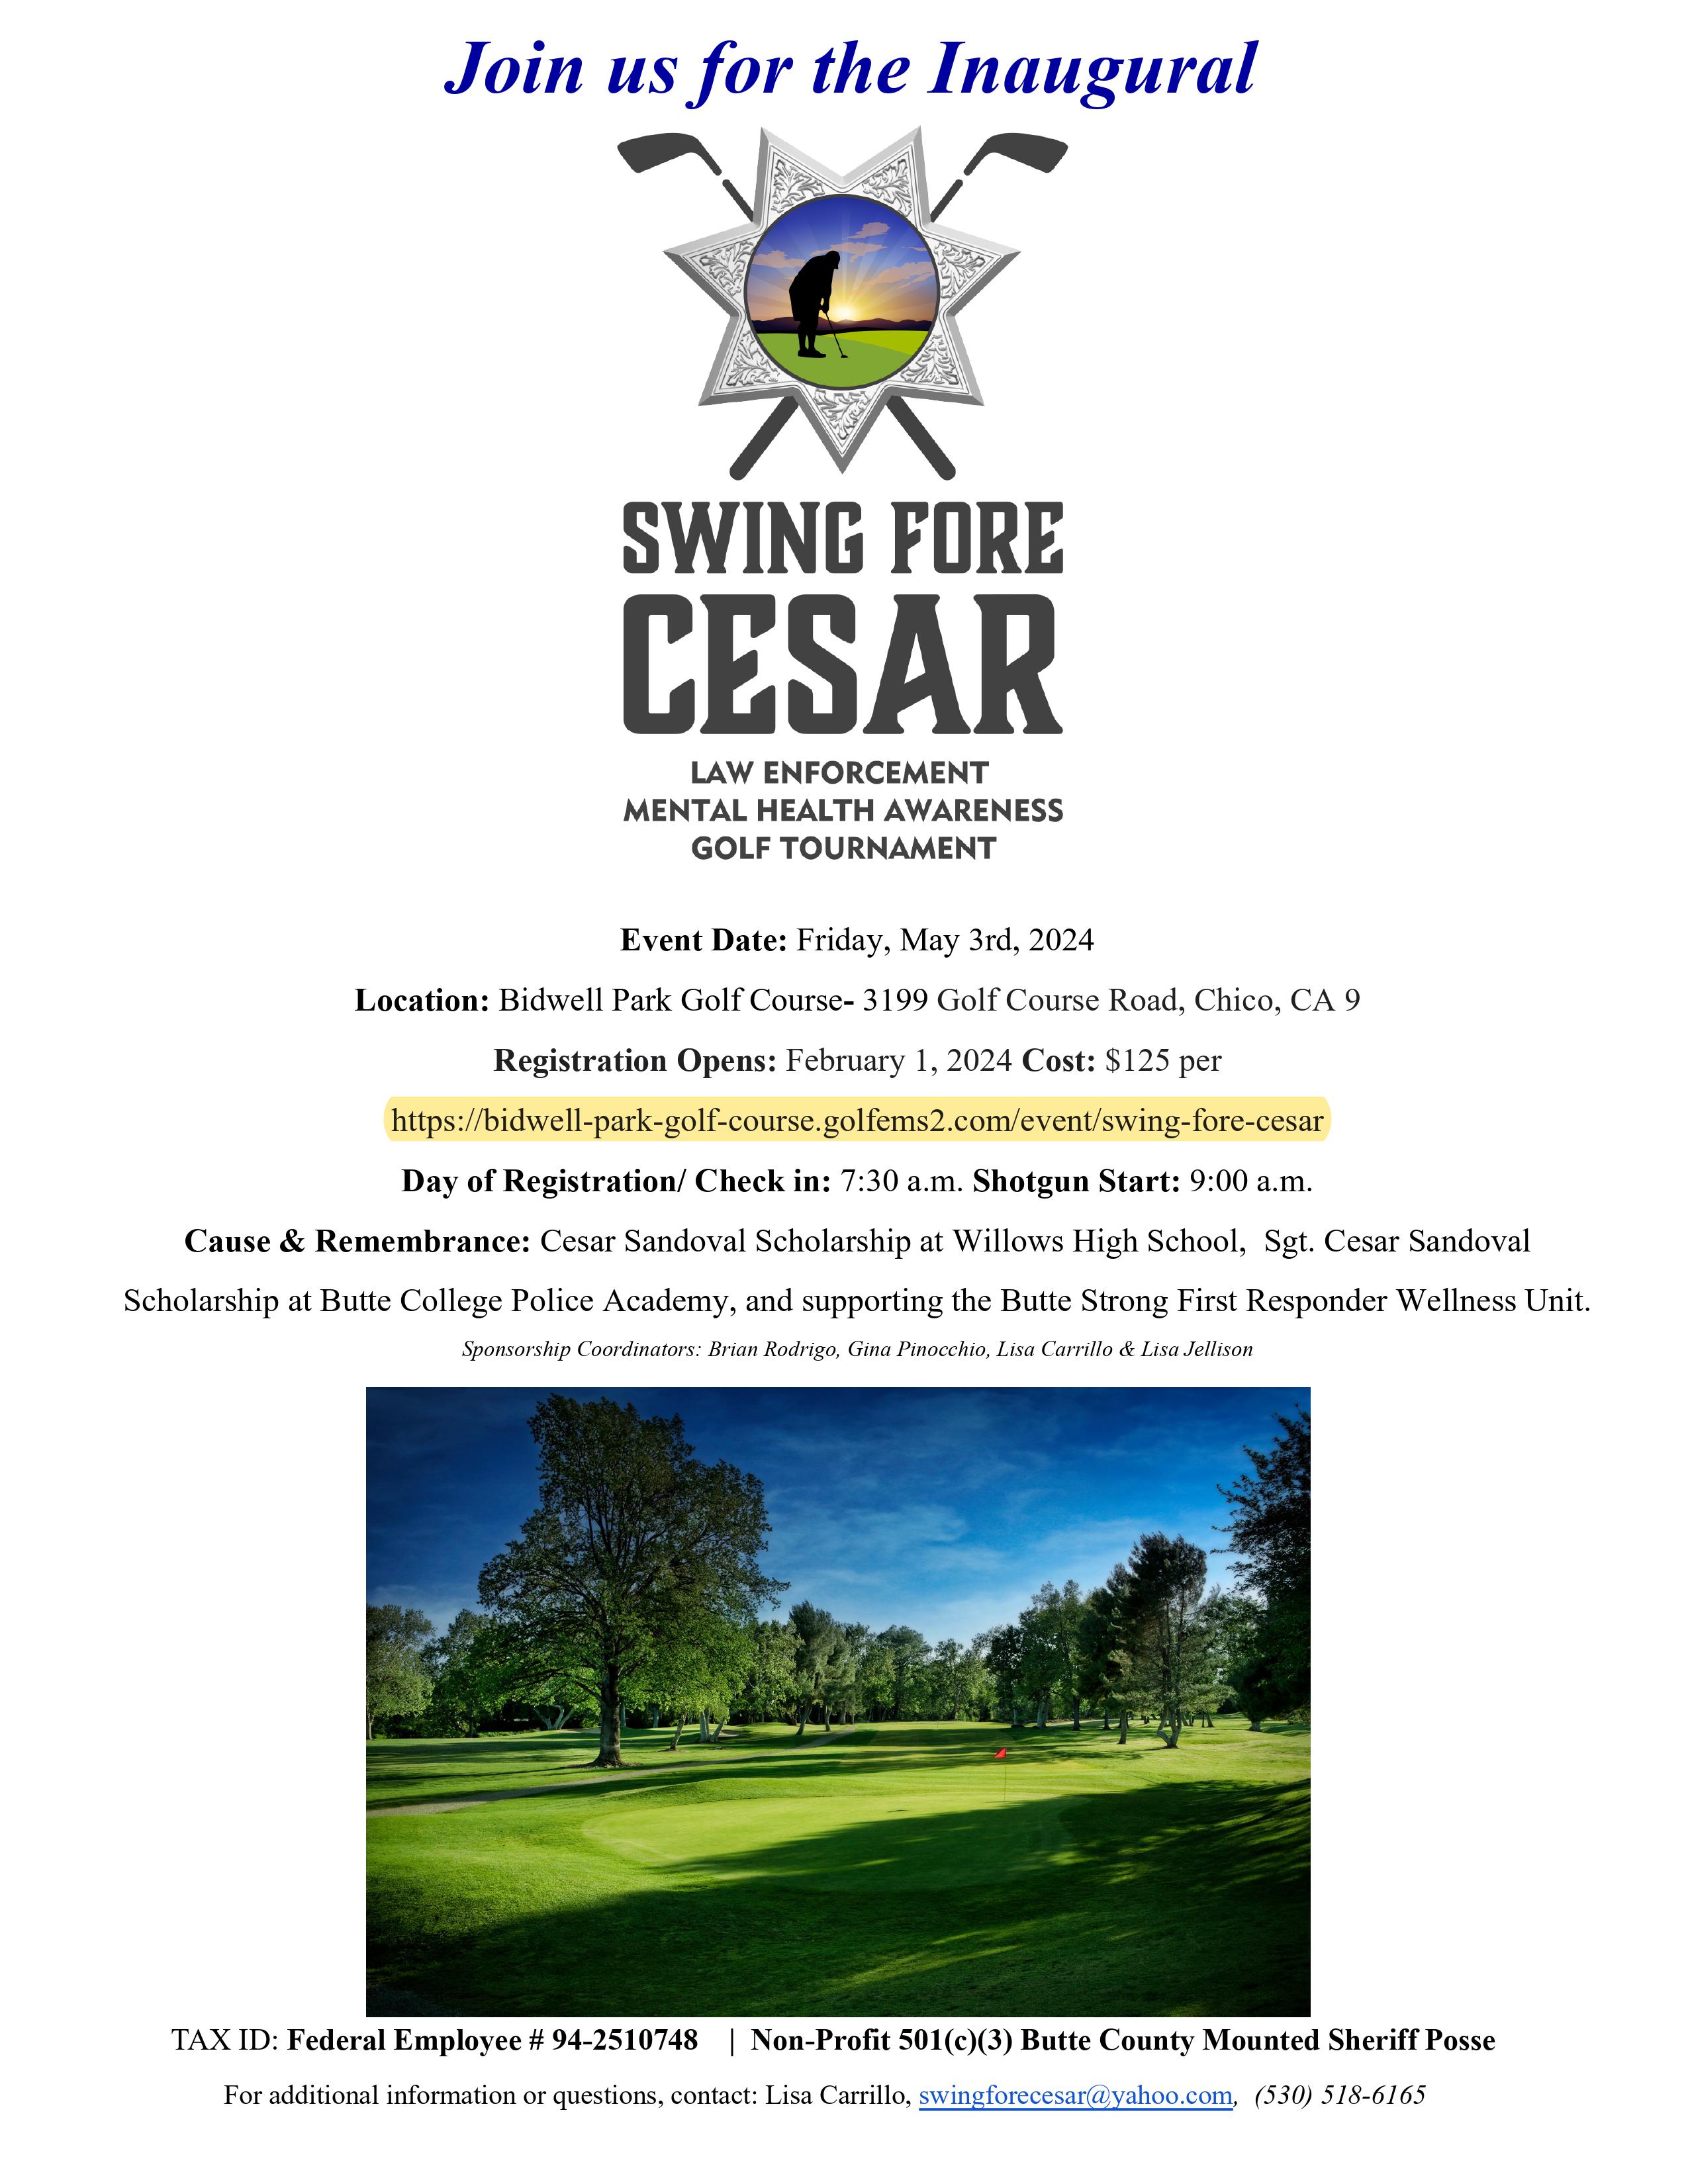 Bidwell Park Golf Course | Events At The Golf Course - (January 2024) Bidwell Park Golf Course Events At The Golf Course – (January 2024) BPGC (2024) Swing Fore Cesar Event (Flyer)